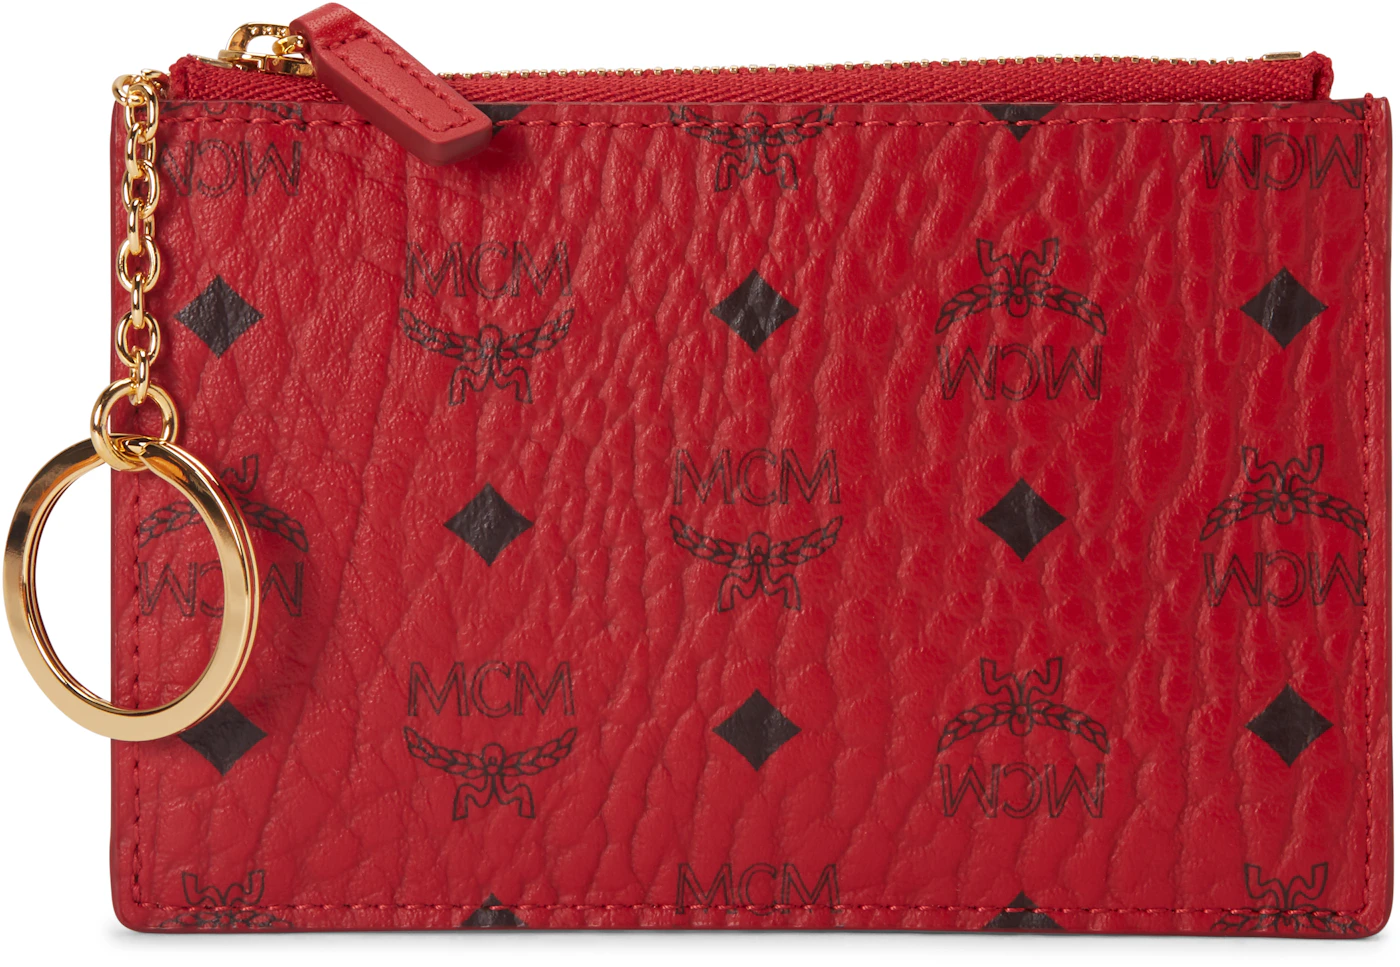 MCM Key Pouch Visetos Mini Ruby Red in Coated Canvas with 24k Gold - US